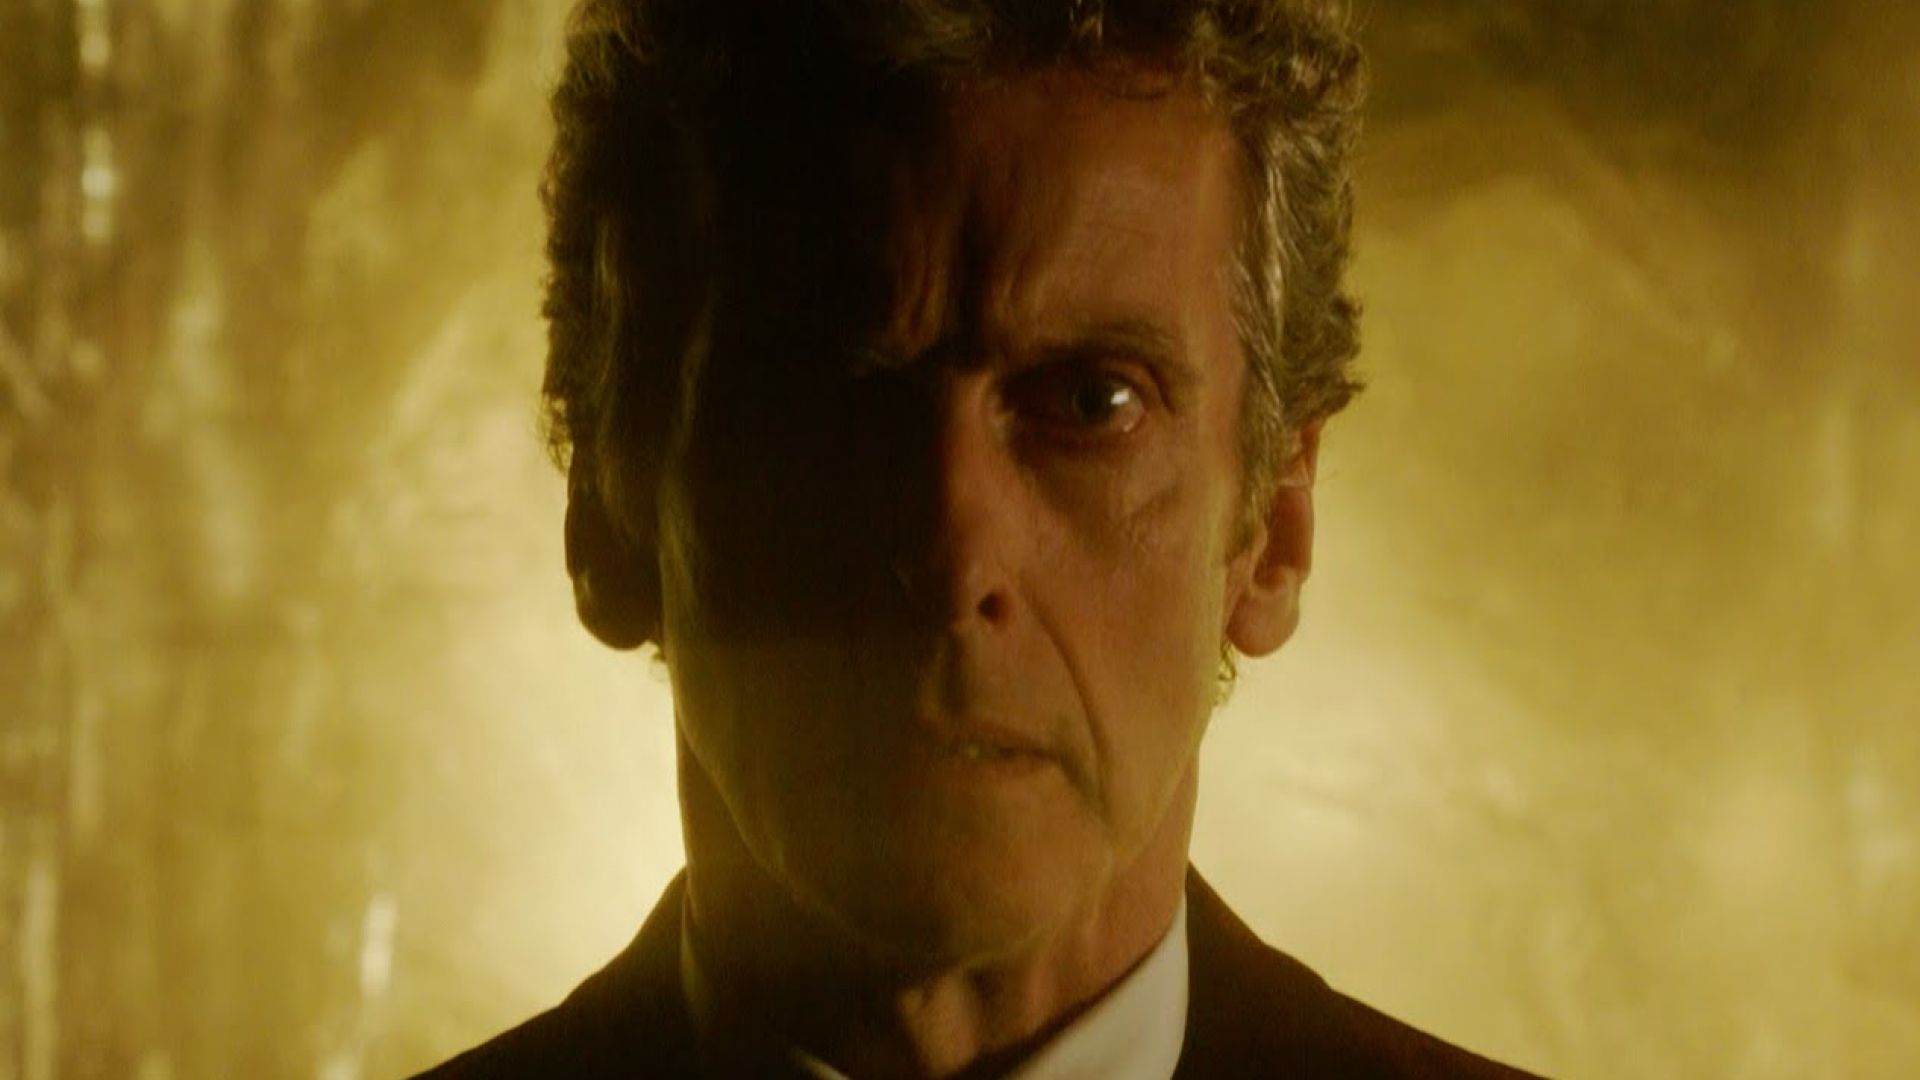 Second trailer for 'Doctor Who' Series 9 starring Maisie Wil